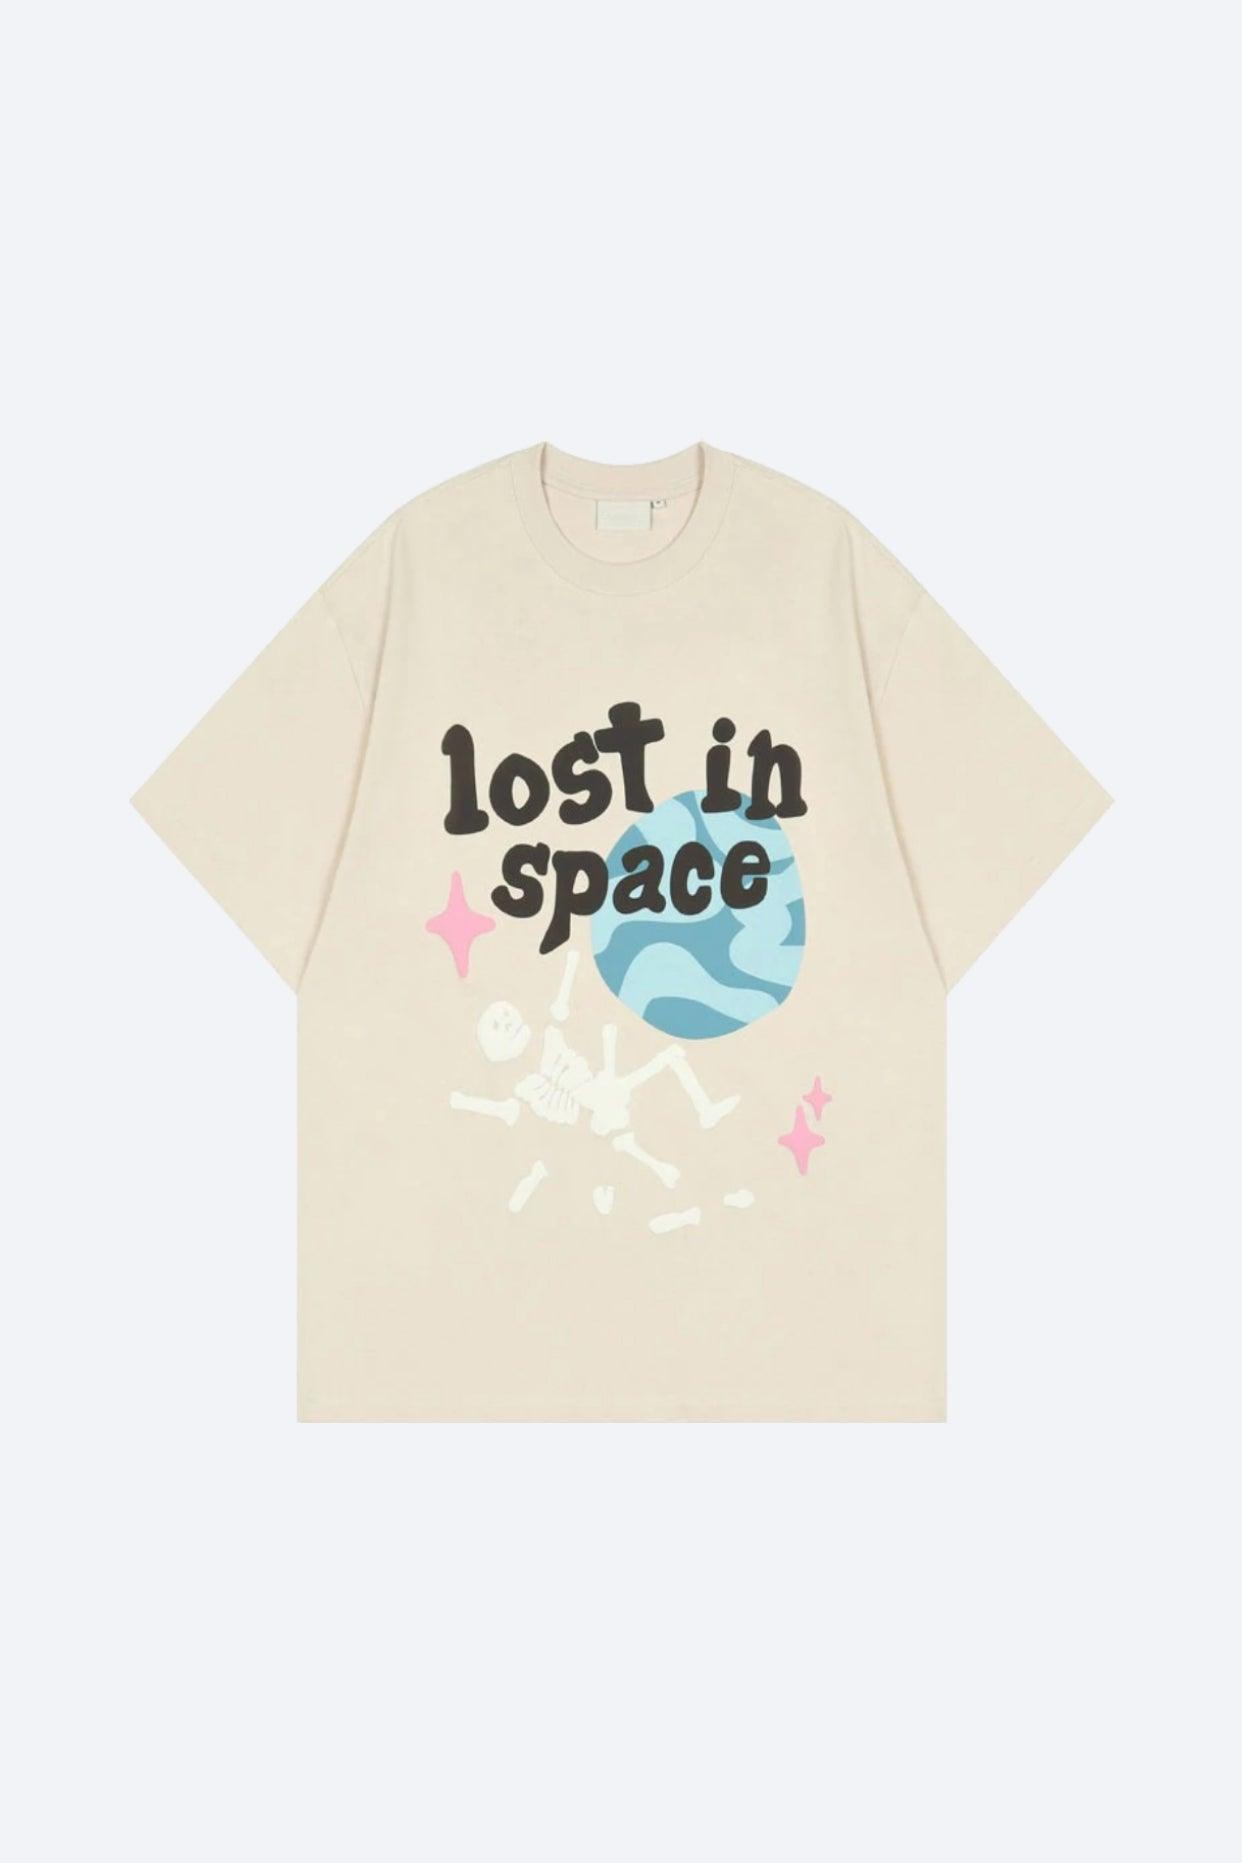 LOST IN SPACE - Vermany